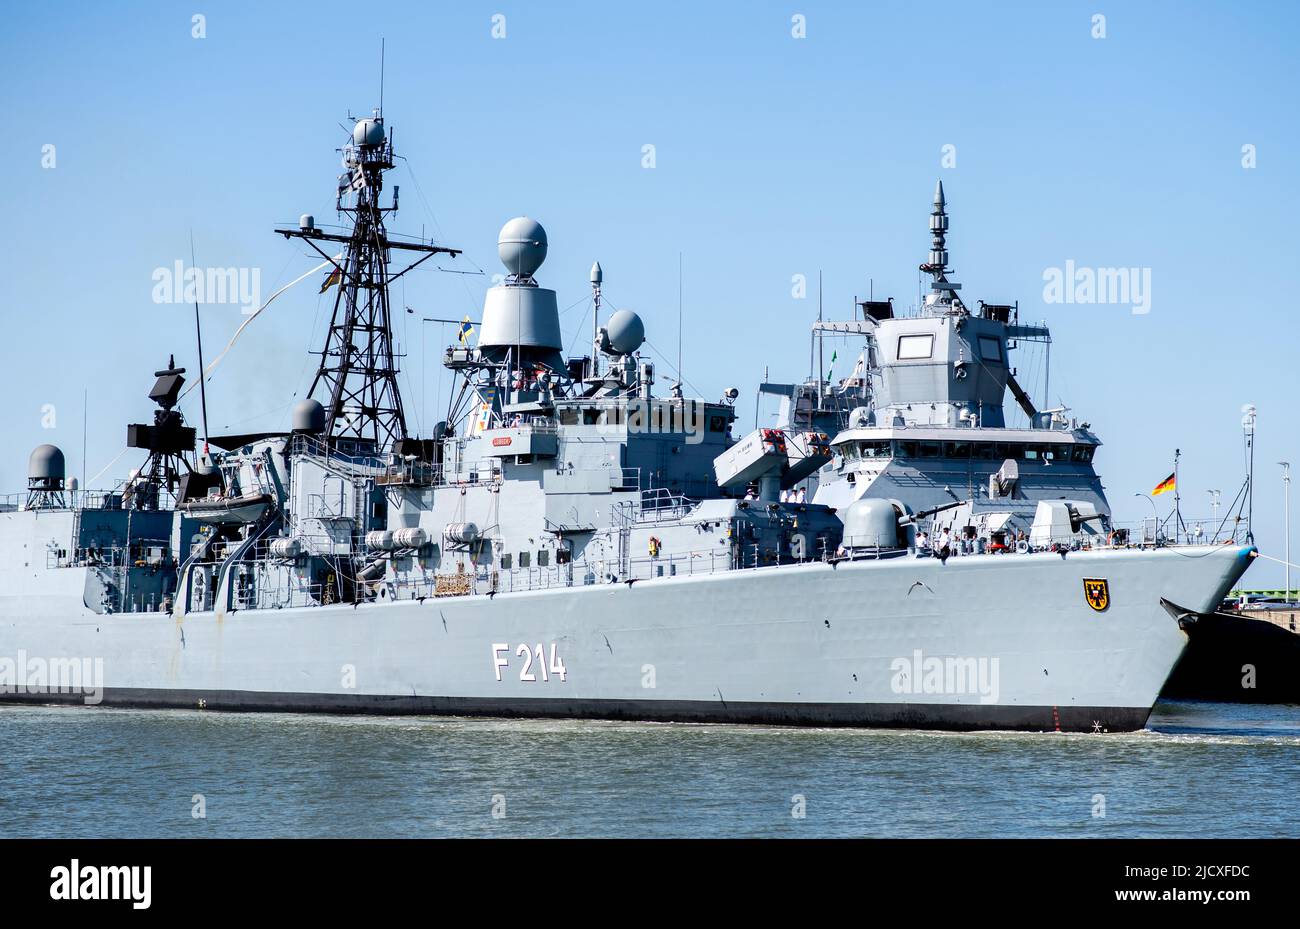 Wilhelmshaven, Germany. 16th June, 2022. The frigate 'Lübeck' enters the harbor at the naval base. After 32 years of service, the ship has returned from a deployment for the last time. The crew of the warship headed for their home port of Wilhelmshaven after a five-month deployment in the Mediterranean. Credit: Hauke-Christian Dittrich/dpa/Alamy Live News Stock Photo